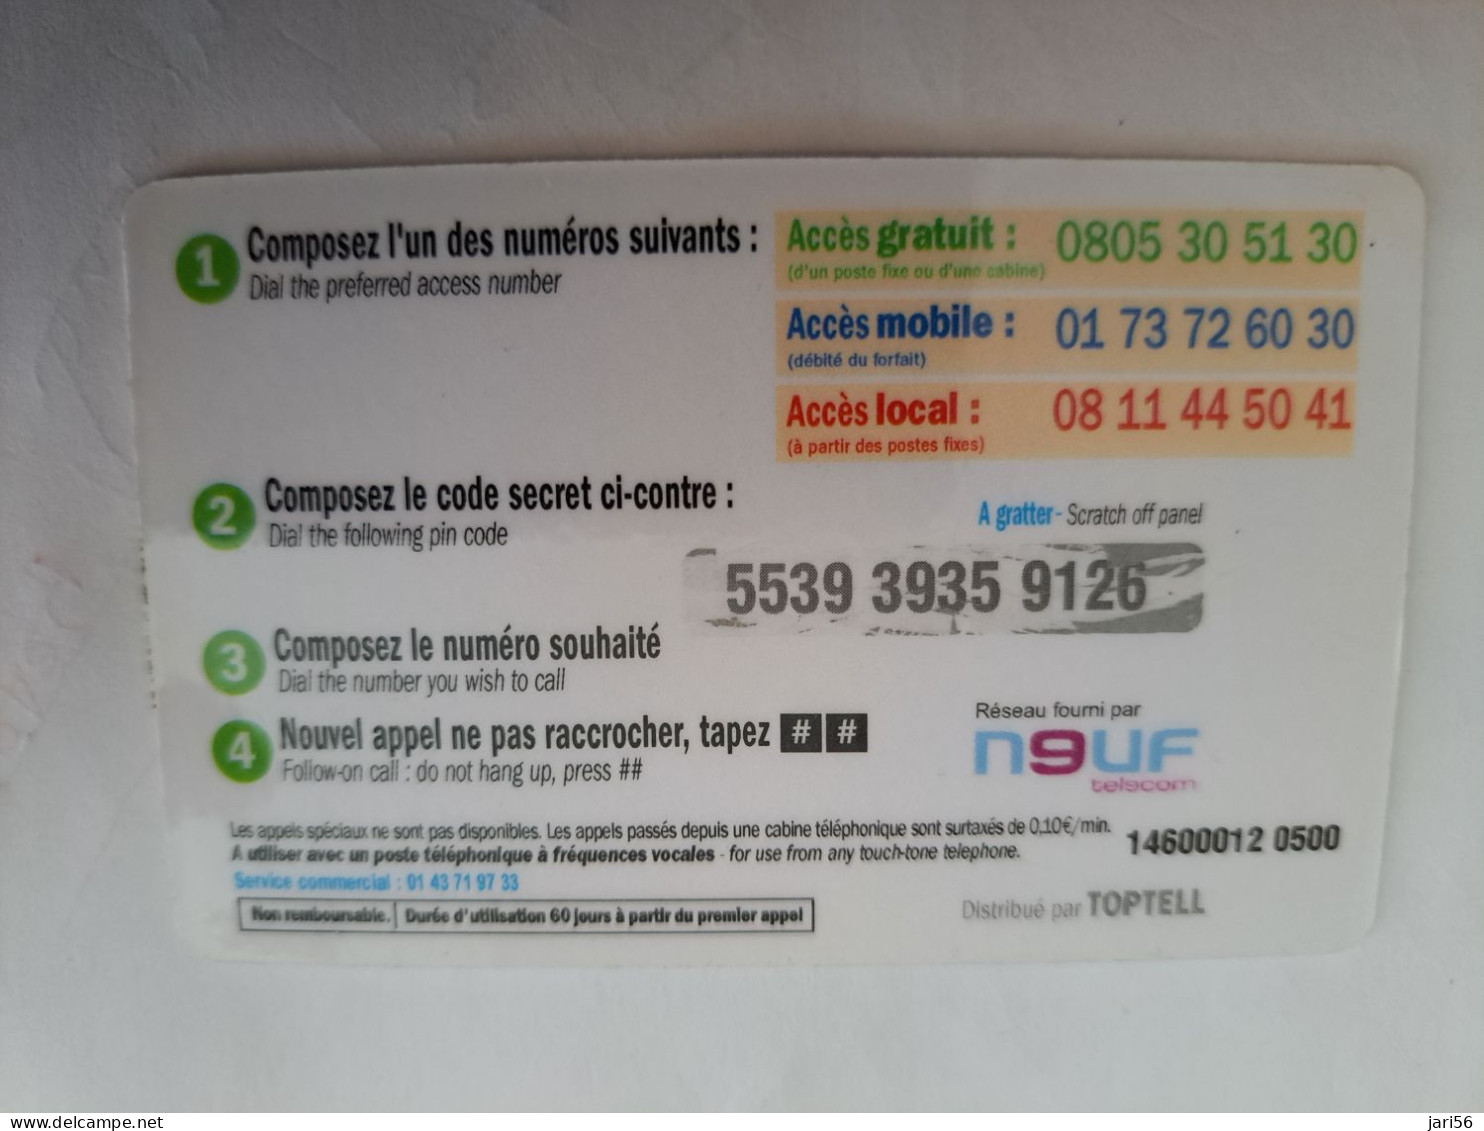 FRANCE/FRANKRIJK  / MAXI TEMPS/ COINS ON CARD/ EURO COIN / € 3,50 /  PREPAID  / USED   ** 14007** - Mobicartes (GSM/SIM)